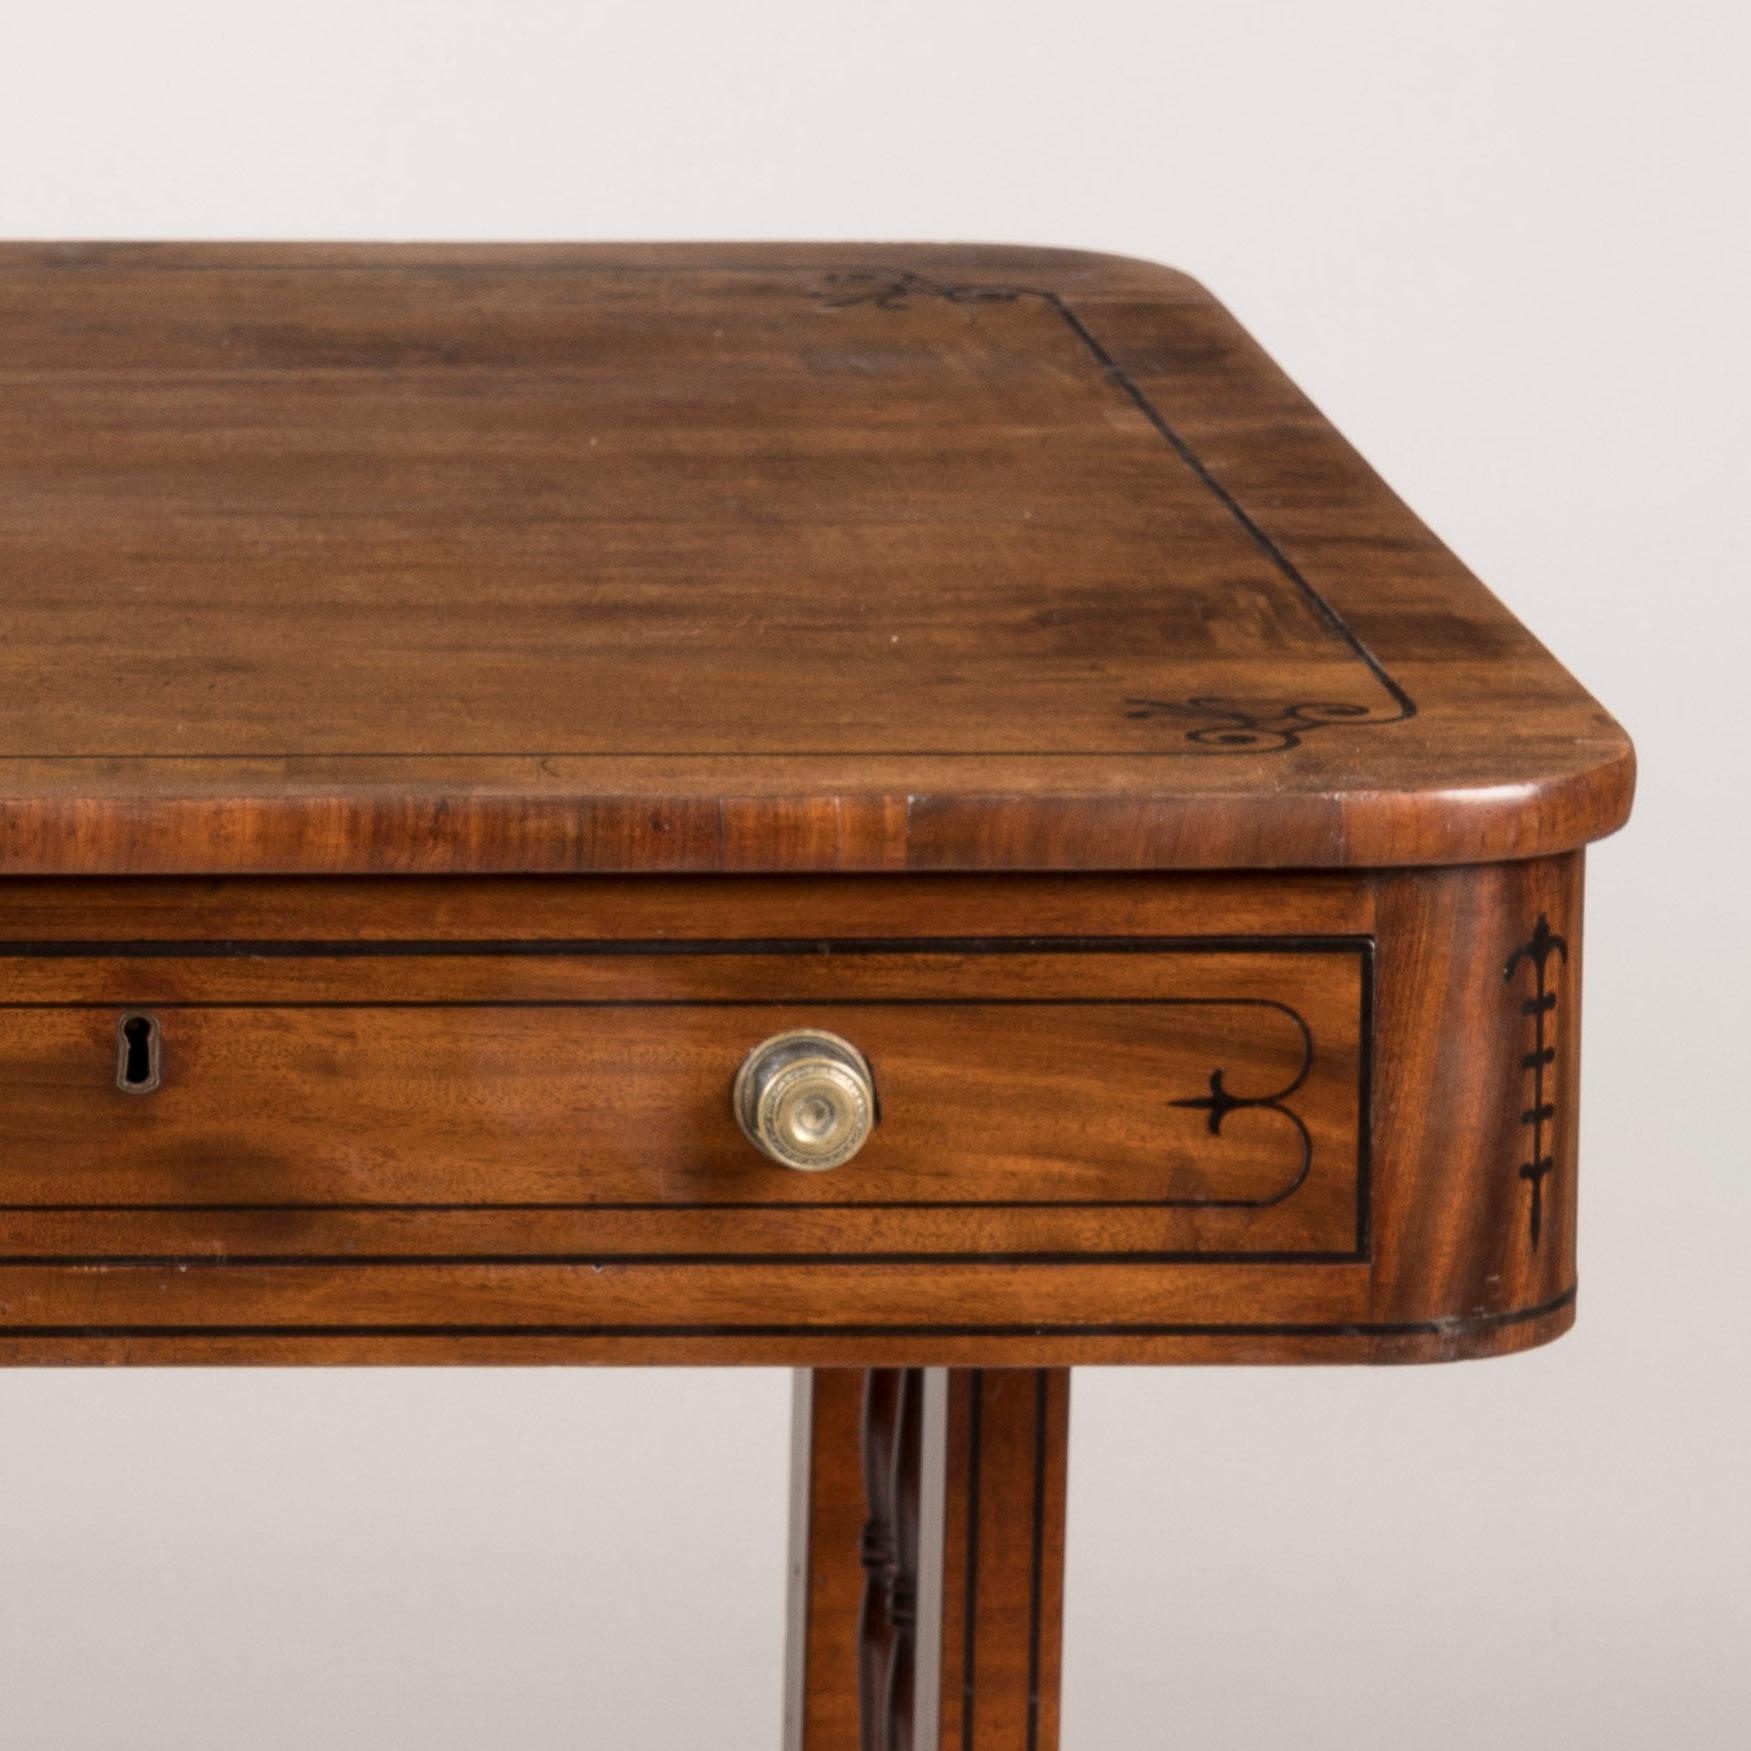 Elegant English Regency Period Mahogany Table with Inlaid Details For Sale 3